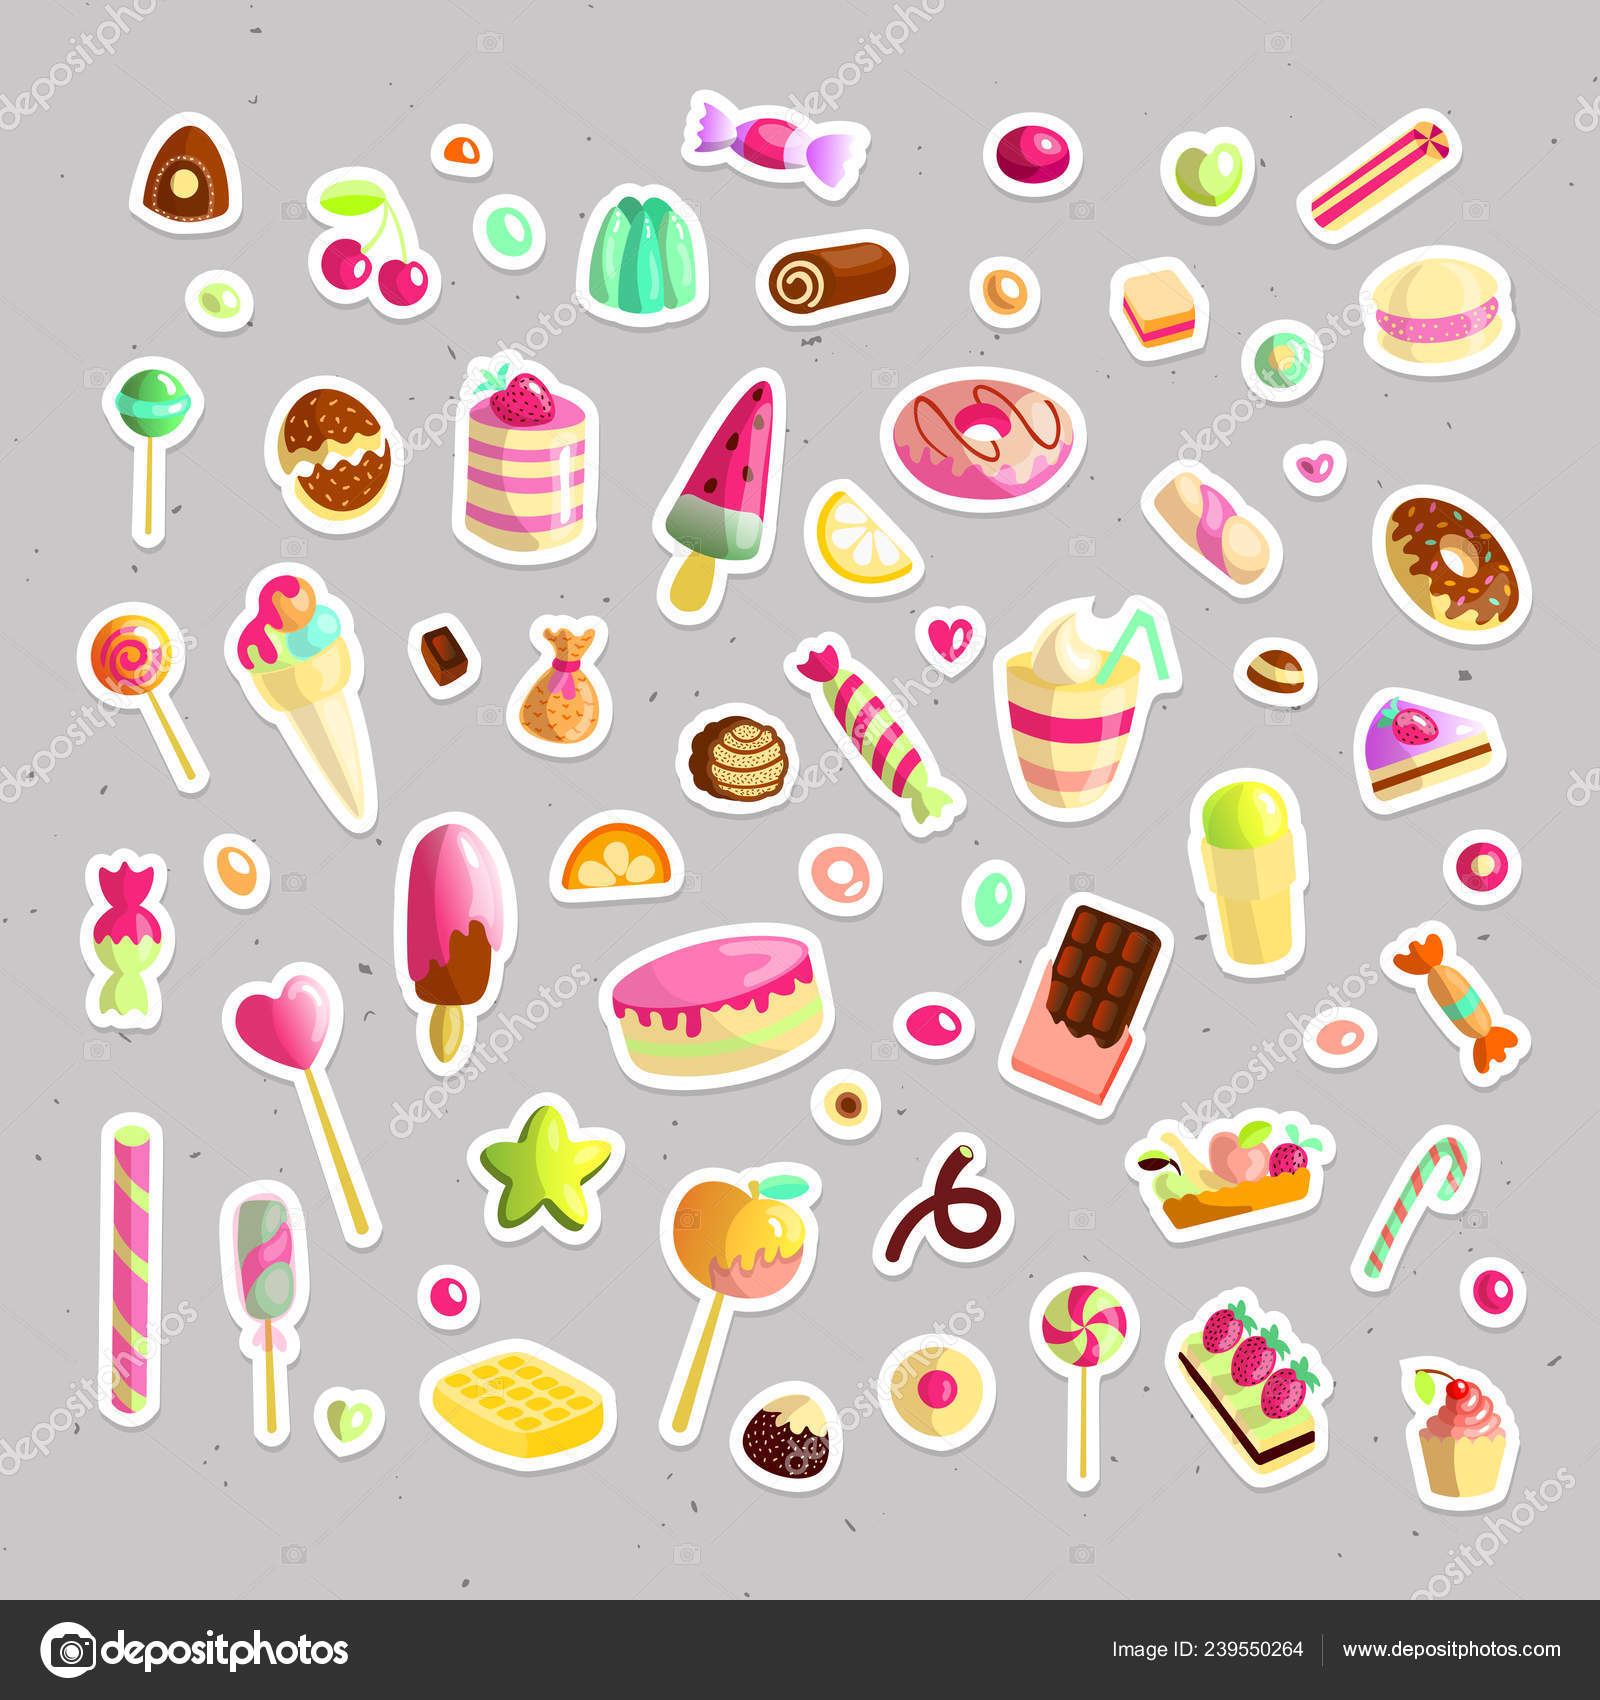 Sweet cartoon candy set. Collection of sweets, cartoon style